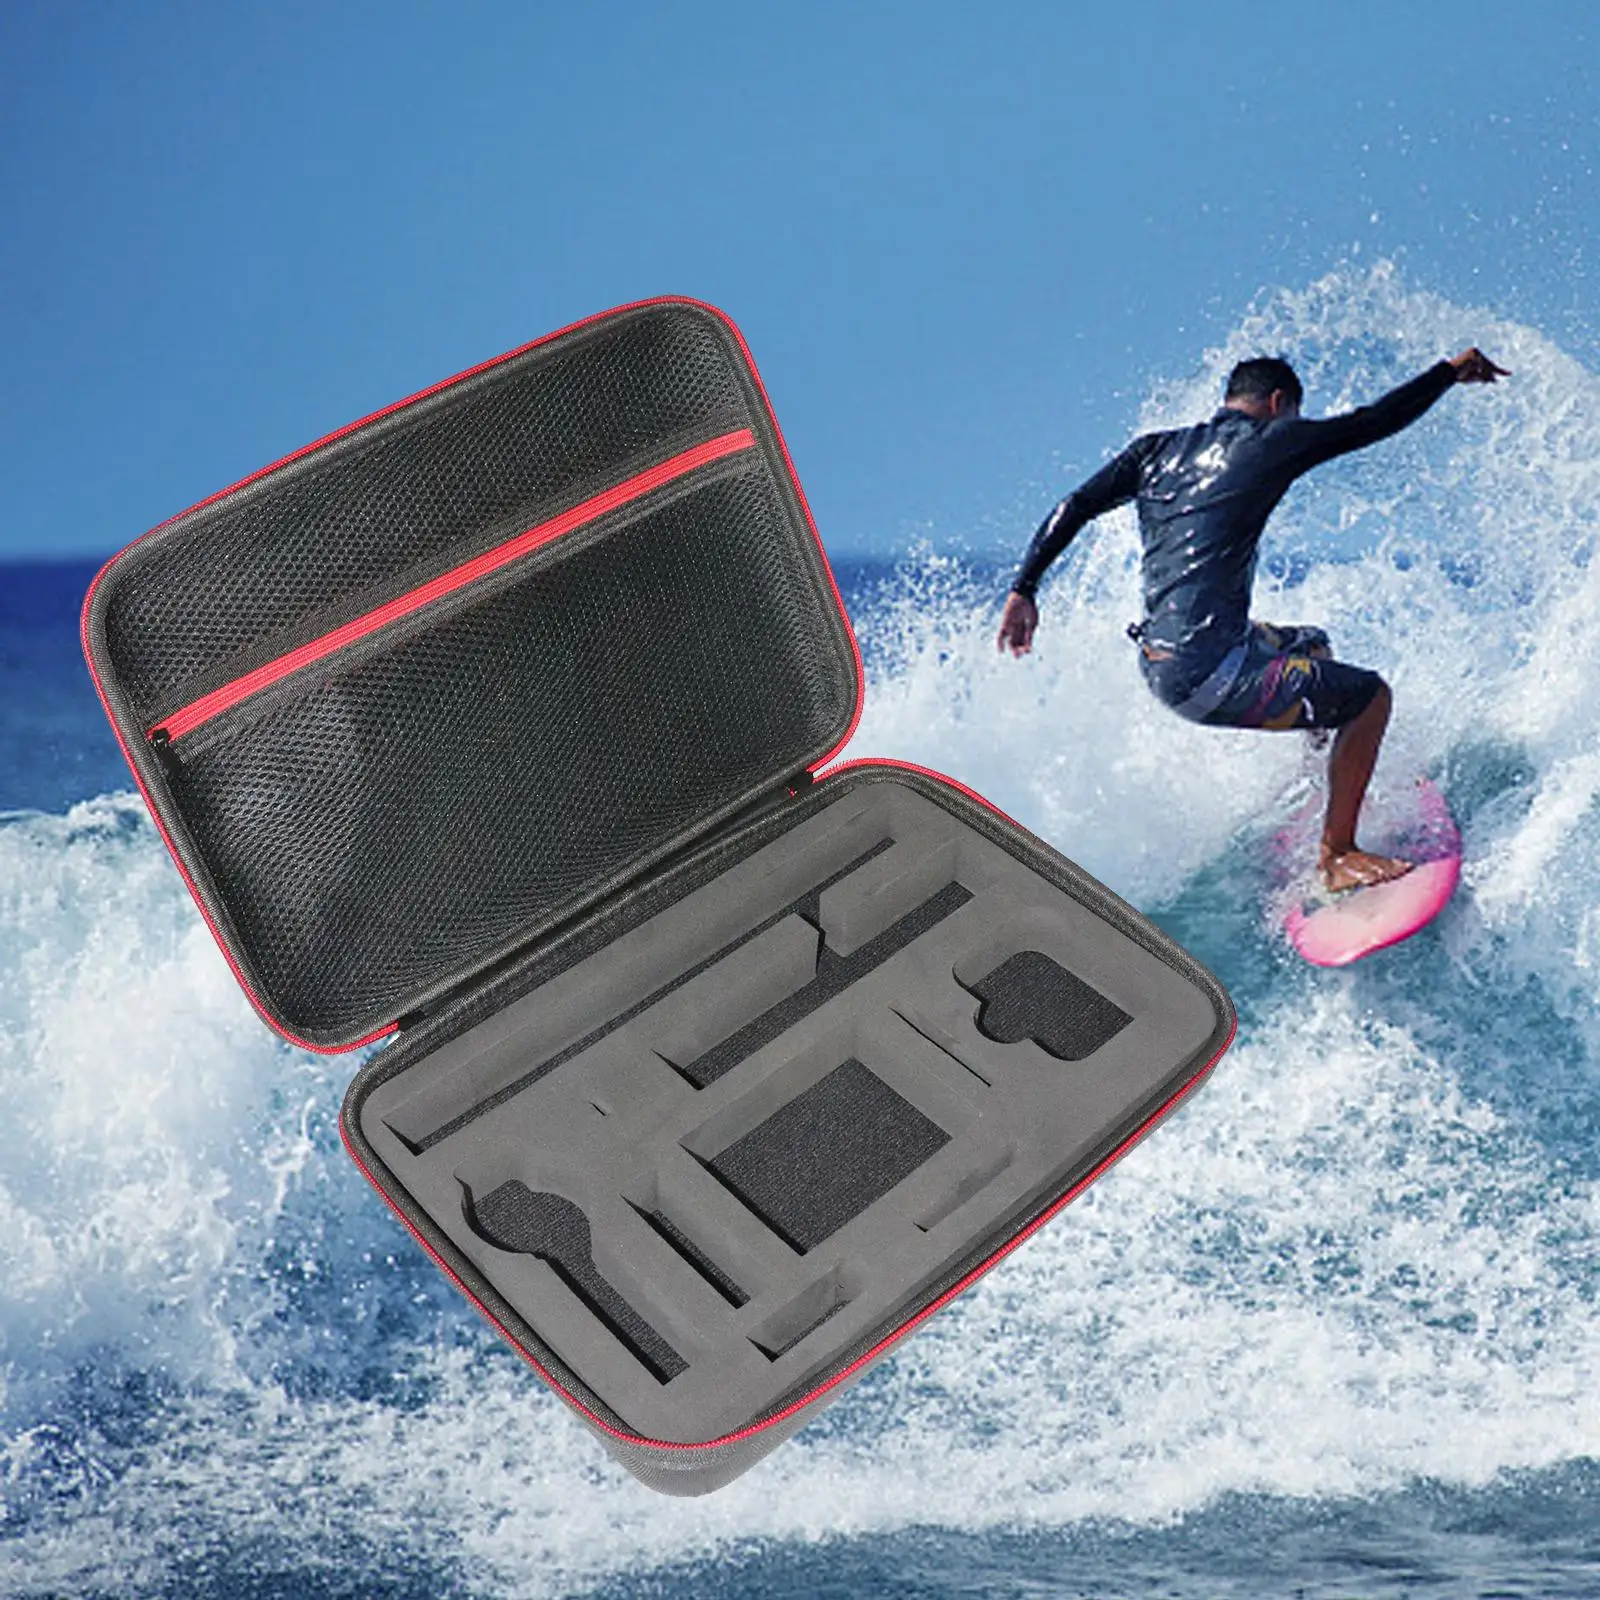 Travel Carrying Case Scratchproof for Cable x3 360 Degree Action Camera